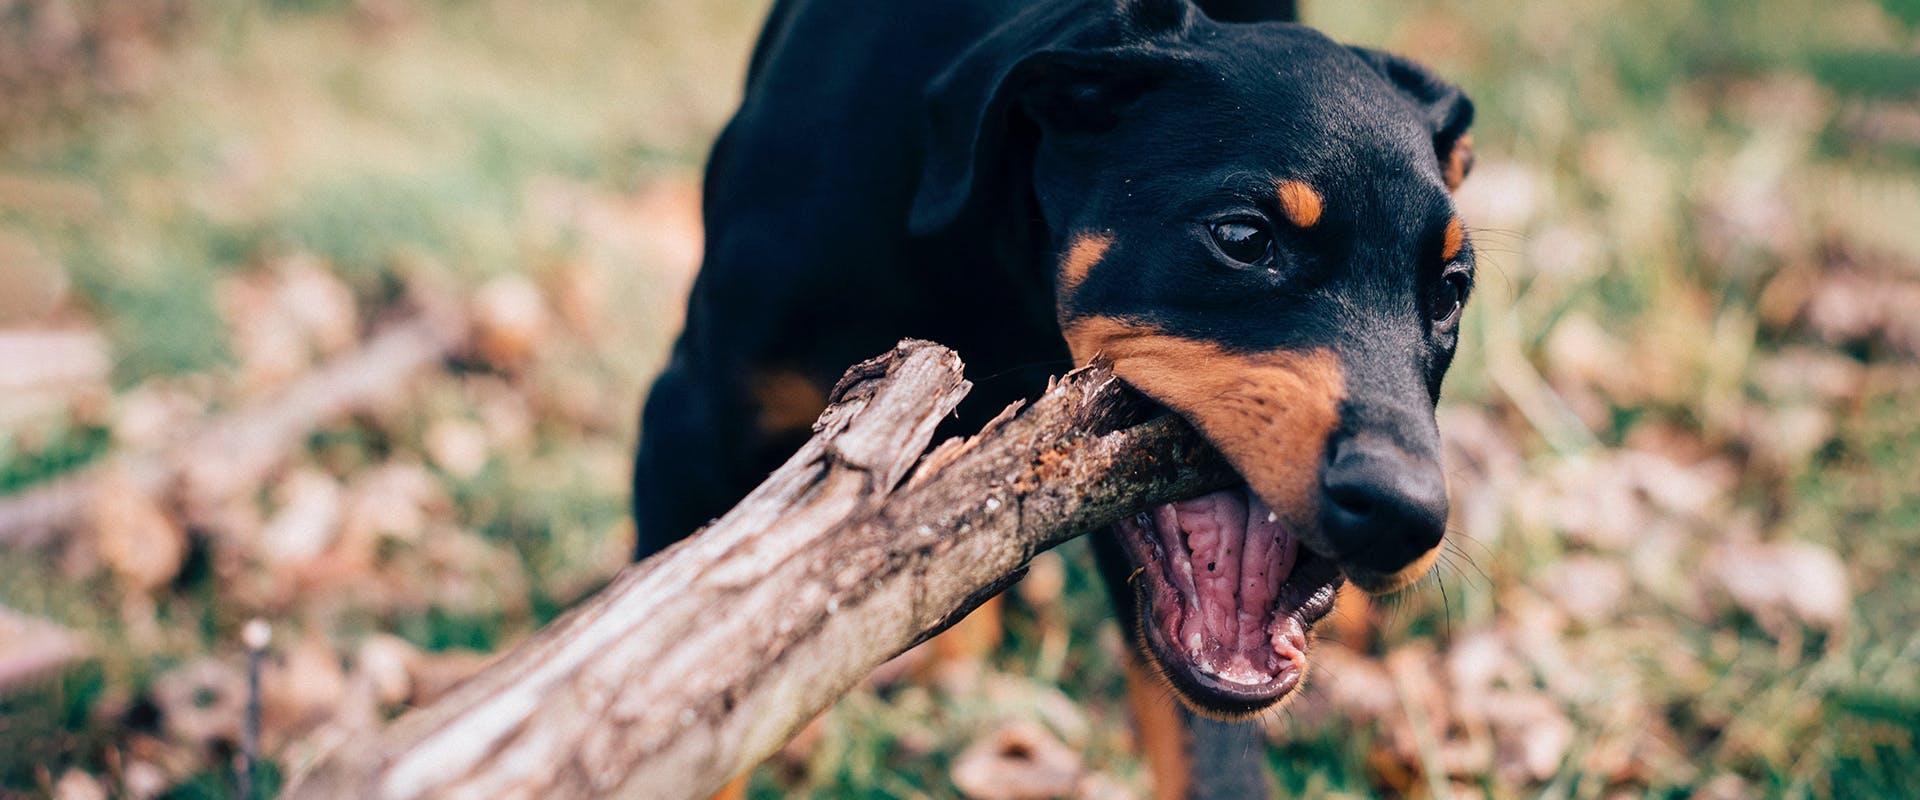 A cute Doberman puppy standing in some leaves and grass, biting one end of a wooden log